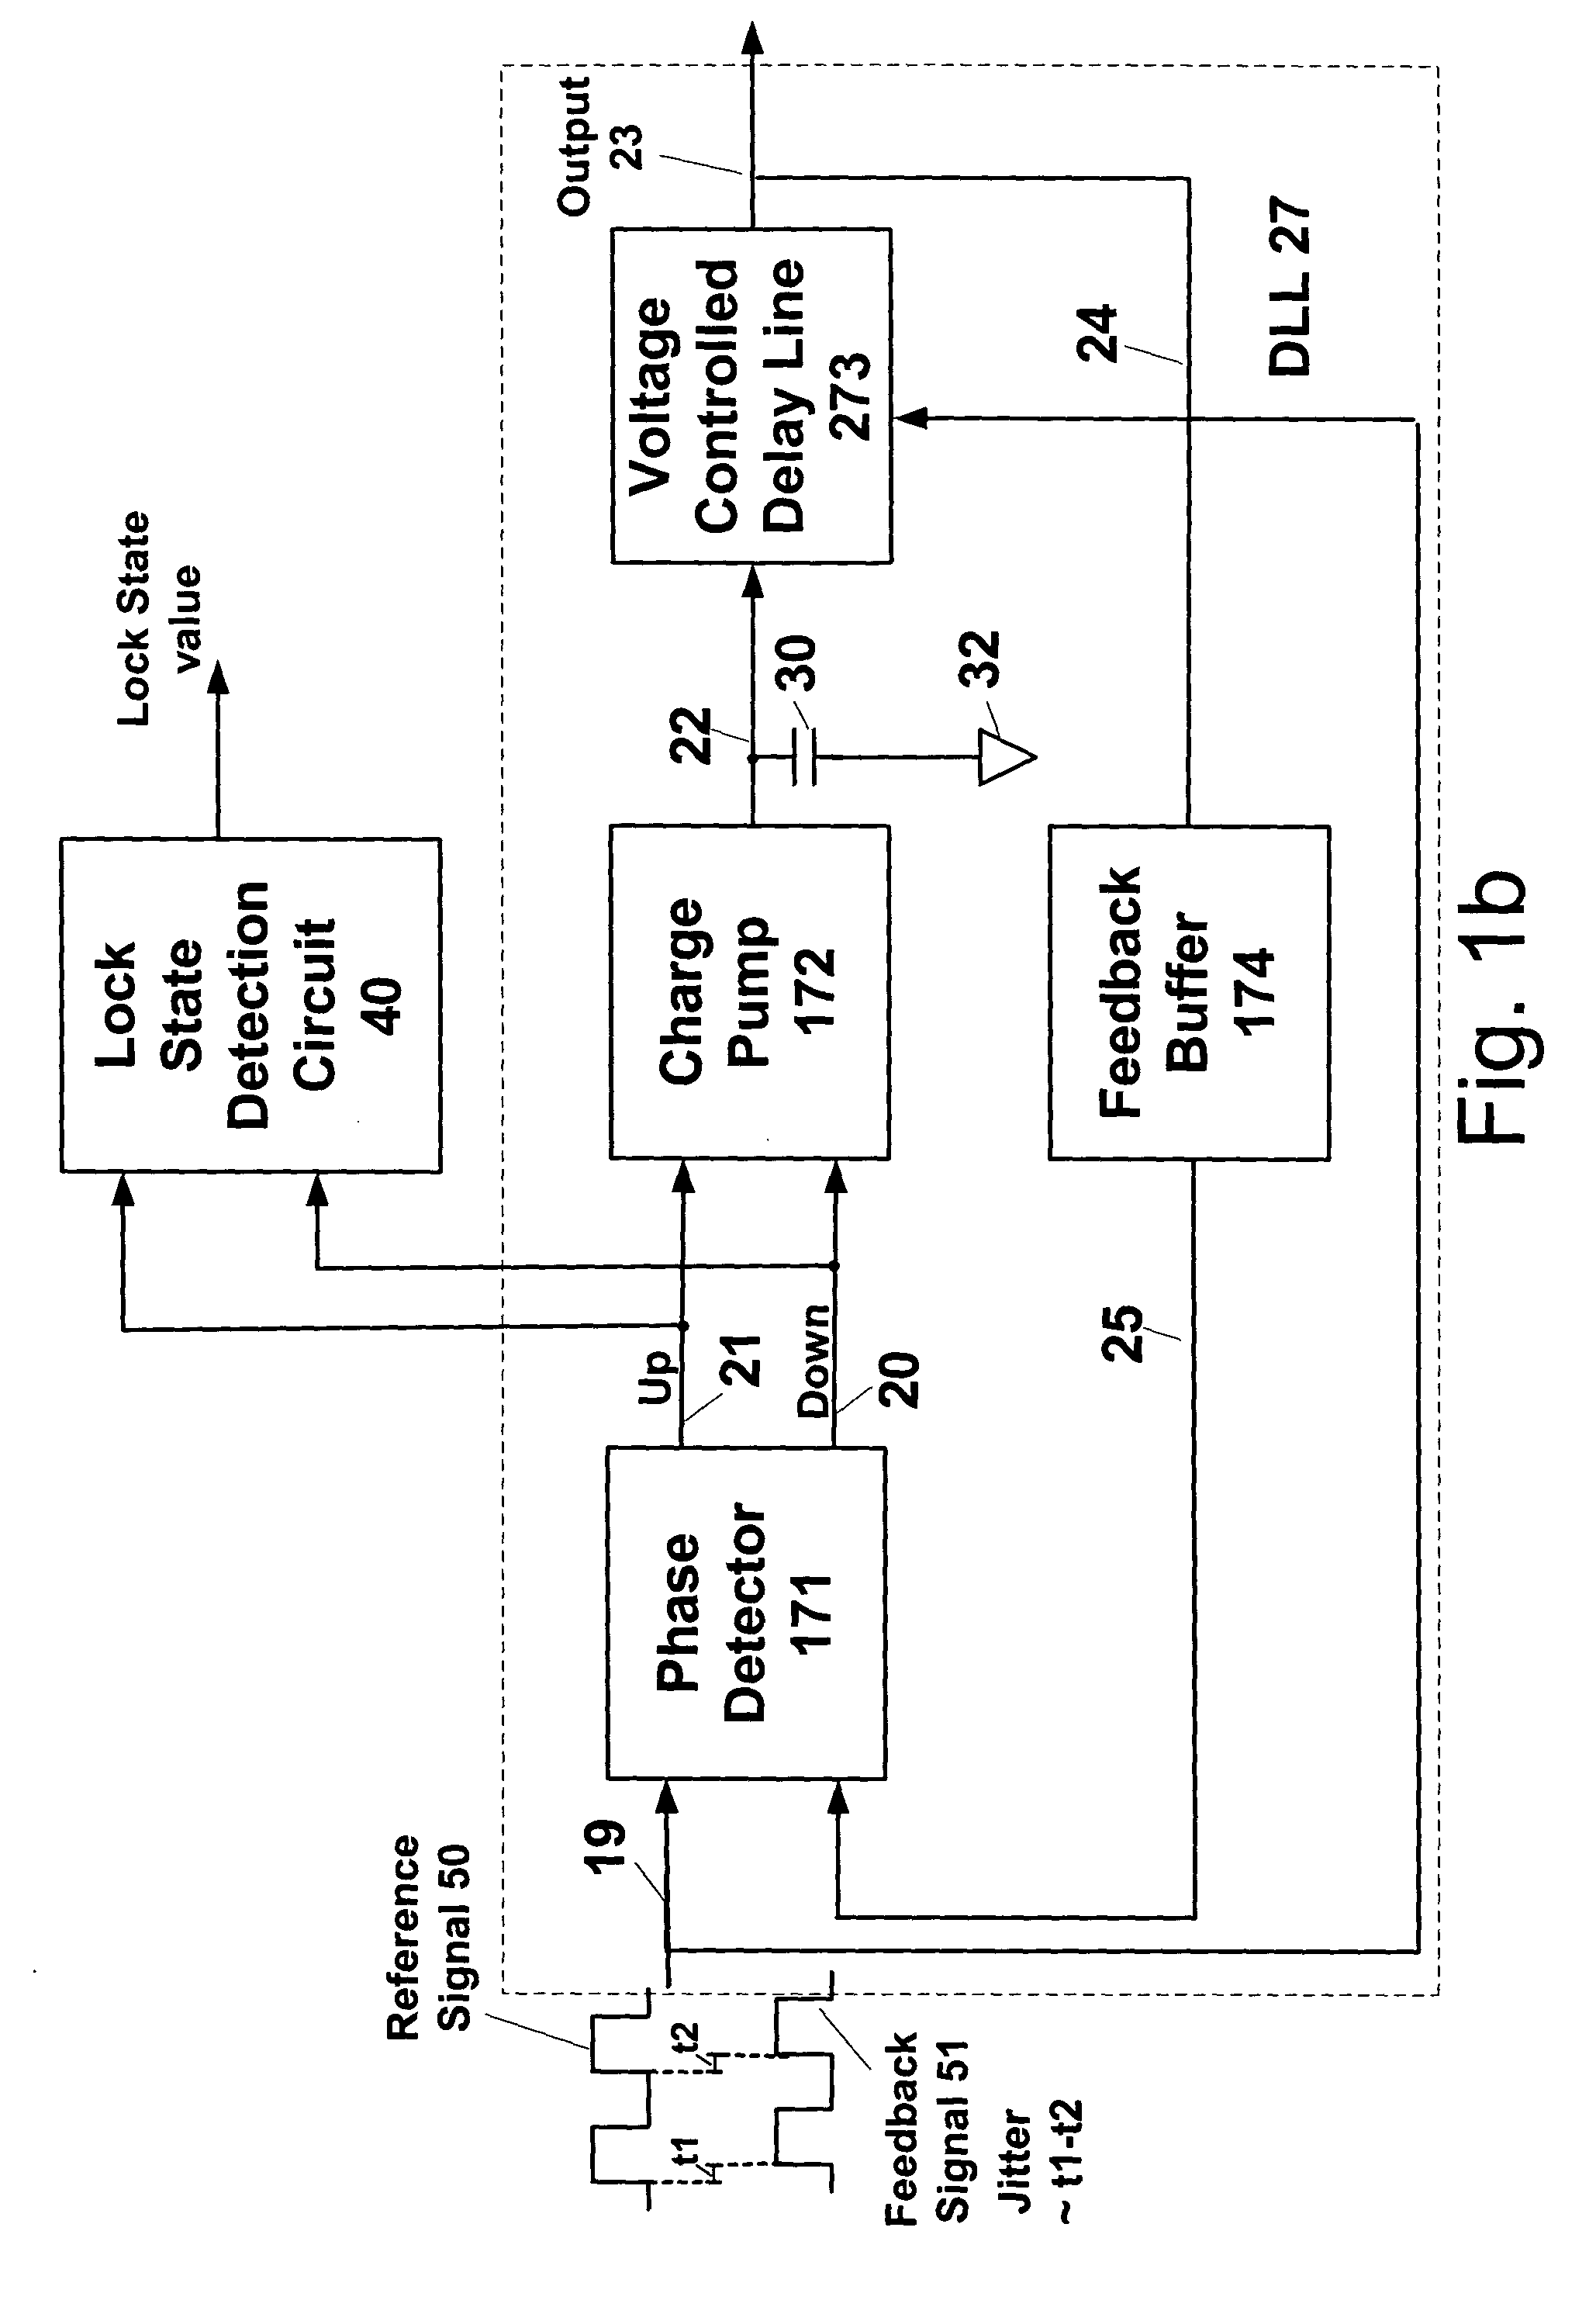 Circuit, apparatus and method for obtaining a lock state value